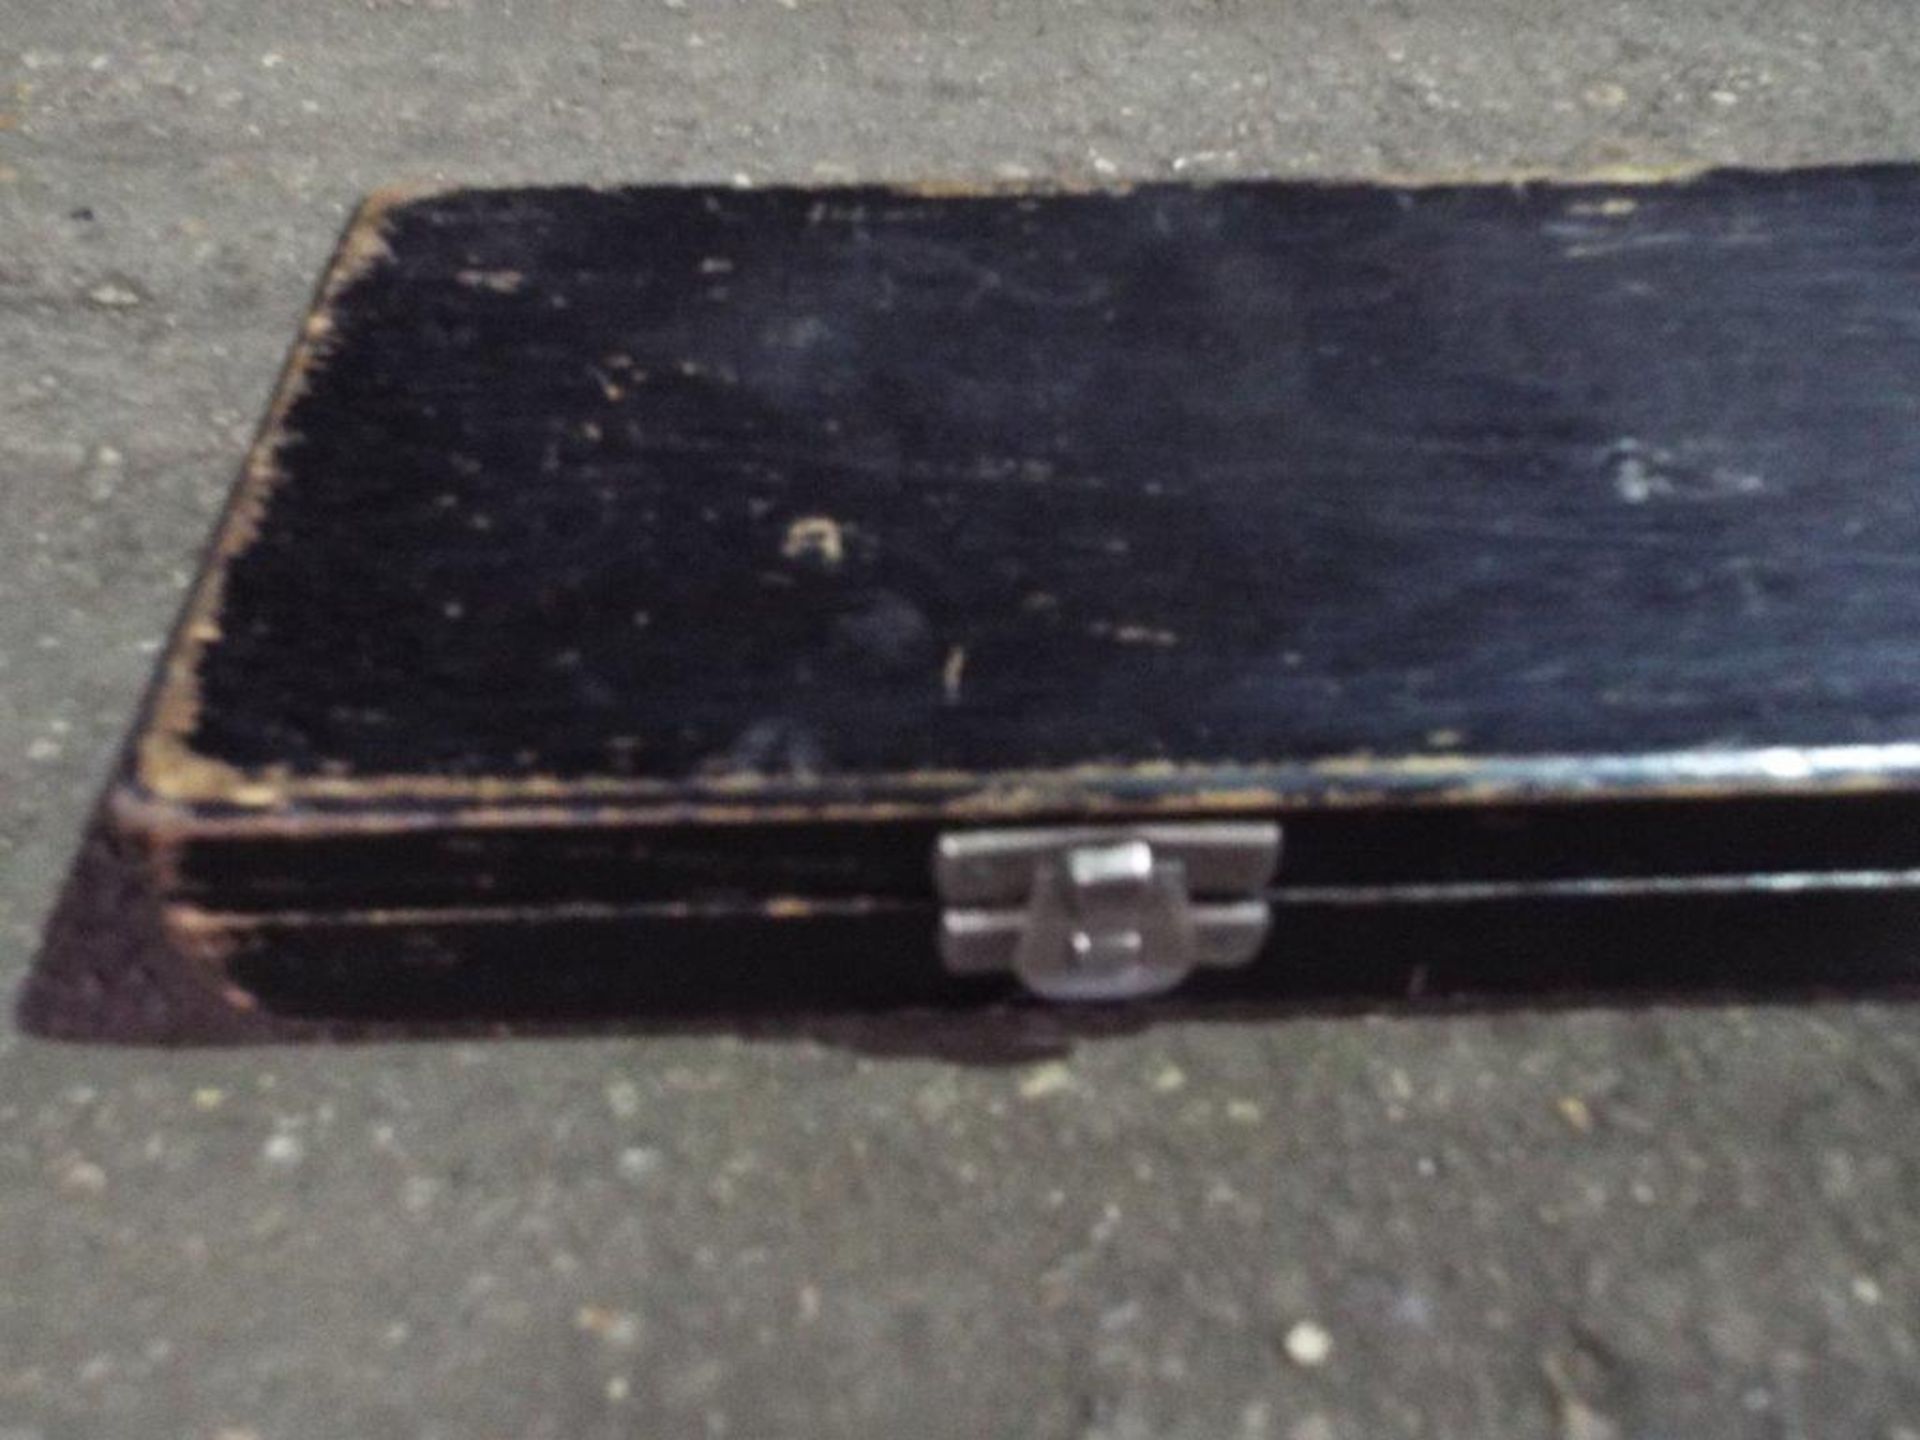 Heavy Duty Stainless Steel 1m Straight Edge in Wooden Transit Case - Image 5 of 6